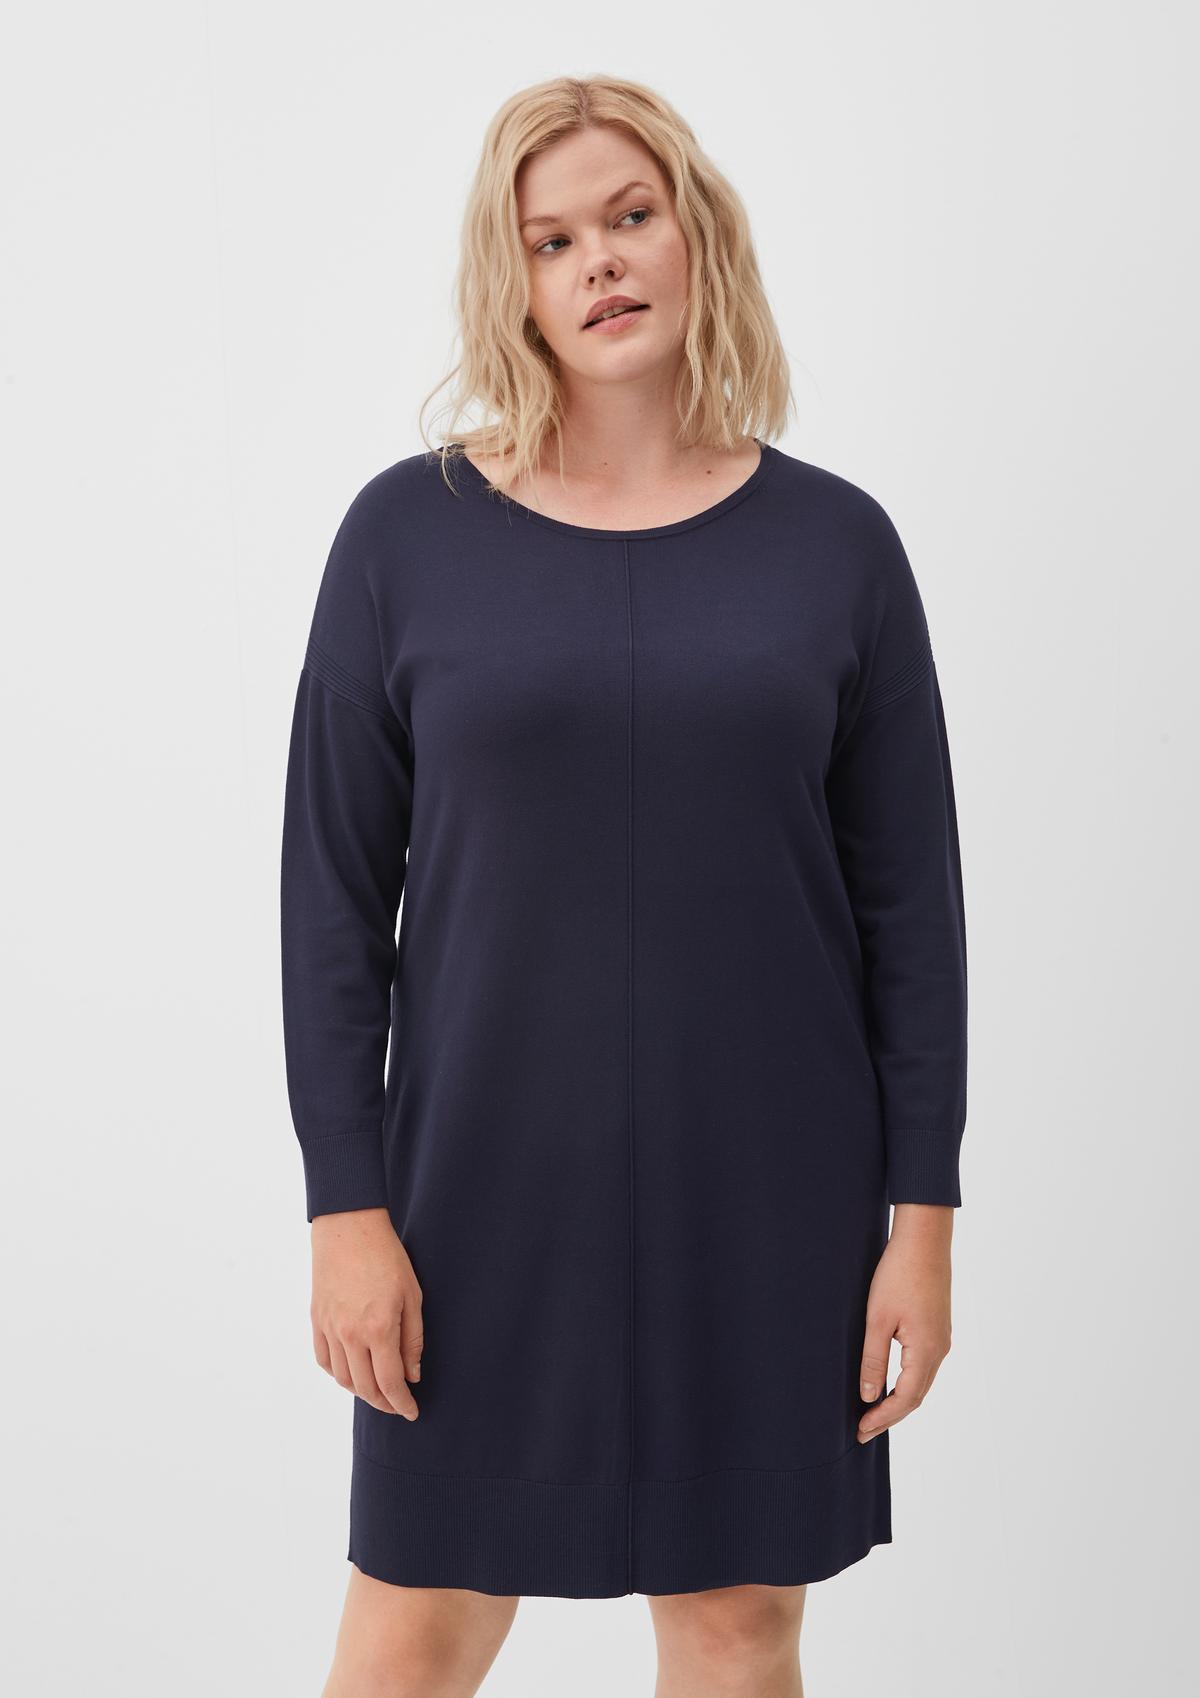 Knitted dress navy with - textured details